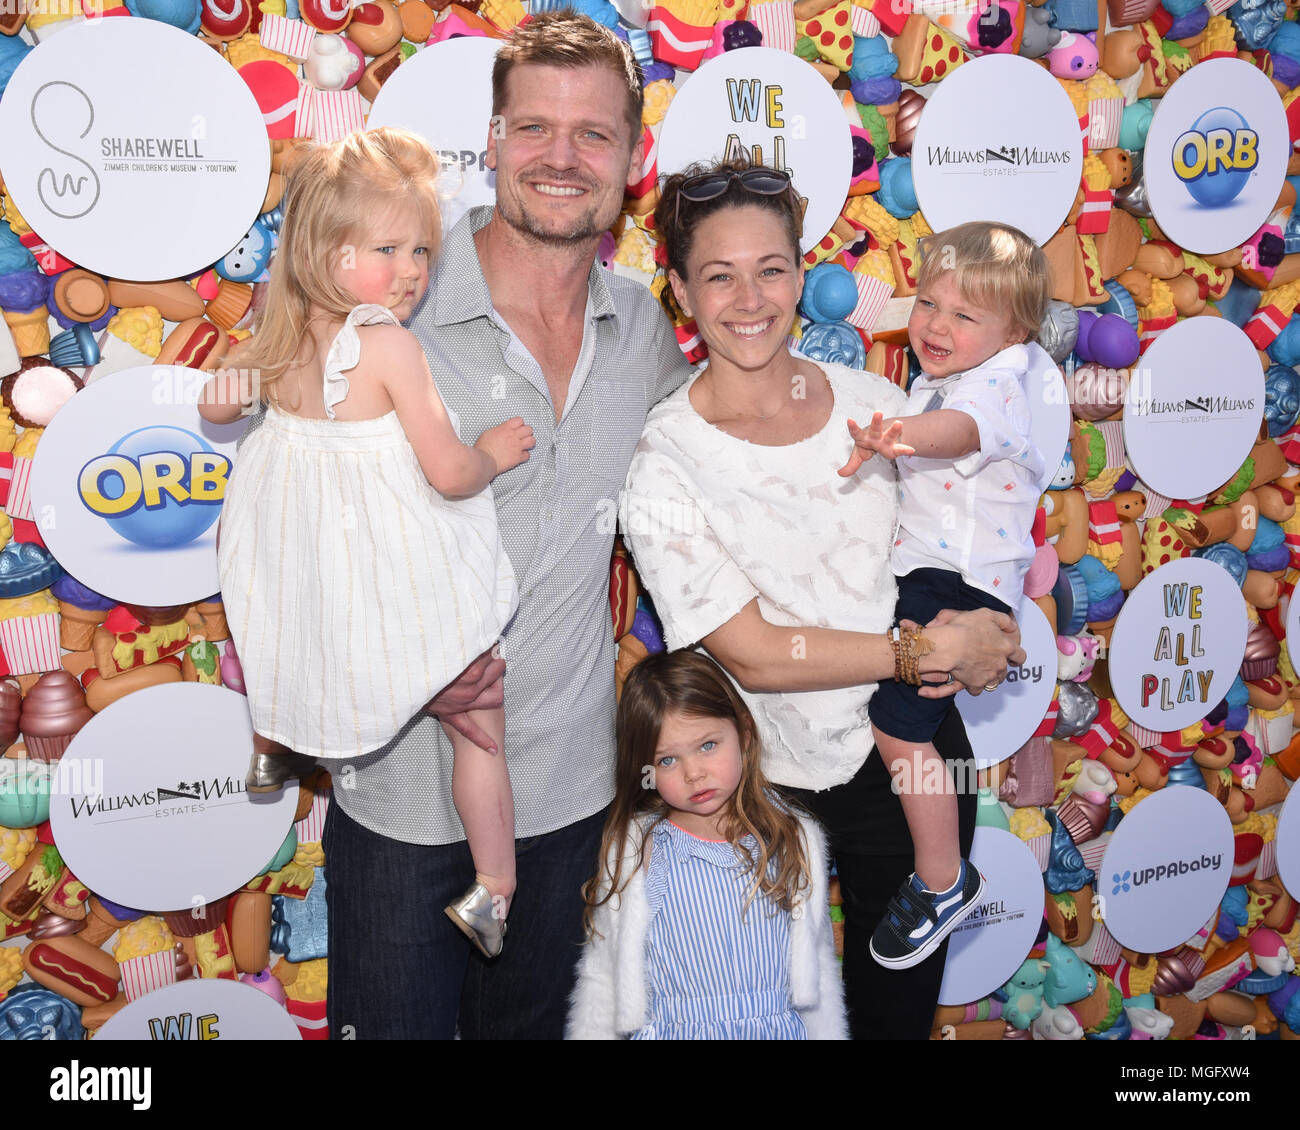 Santa Monica, USA. 28th Apr, 2018. Amy Chase and Bailey Chase arrives for the Zimmer Children's Museum's 3rd Annual We All Play Fundraiser Event on Saturday, April 28, 2018 in Santa Monica, California. Credit: The Photo Access/Alamy Live News Stock Photo